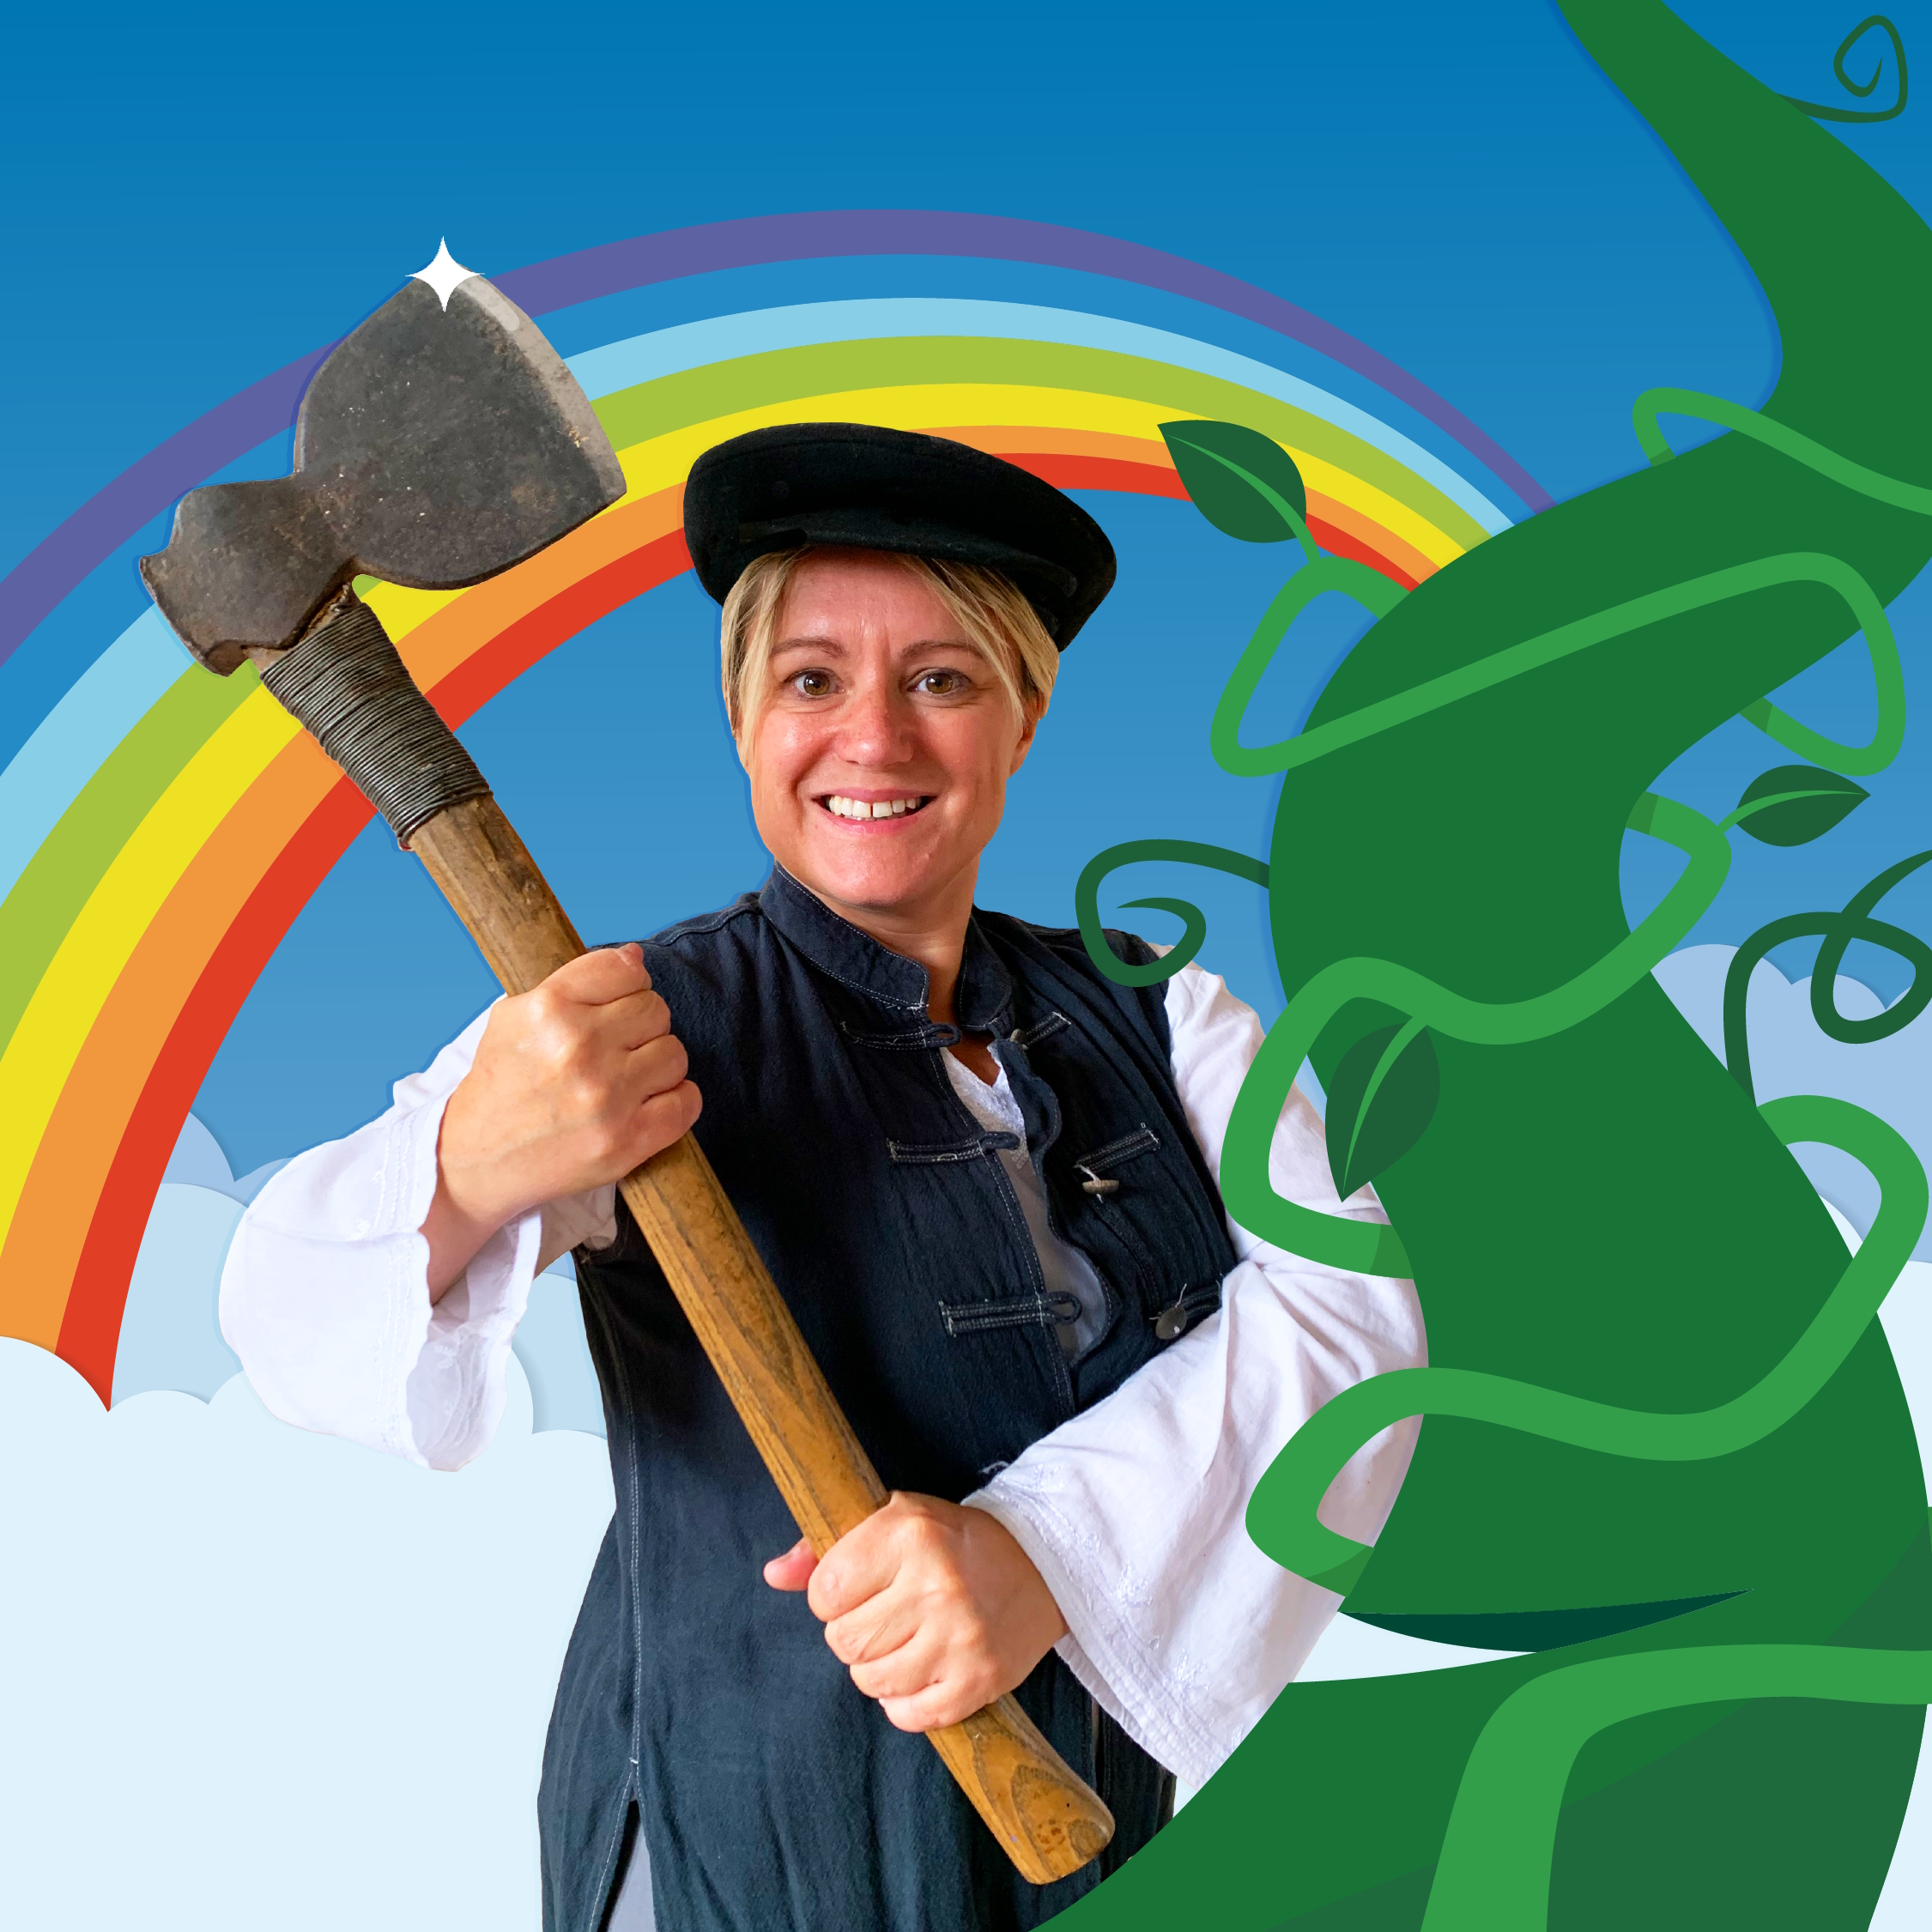 North Norfolk Players' 'Jack And The Beanstalk' panto promotional image